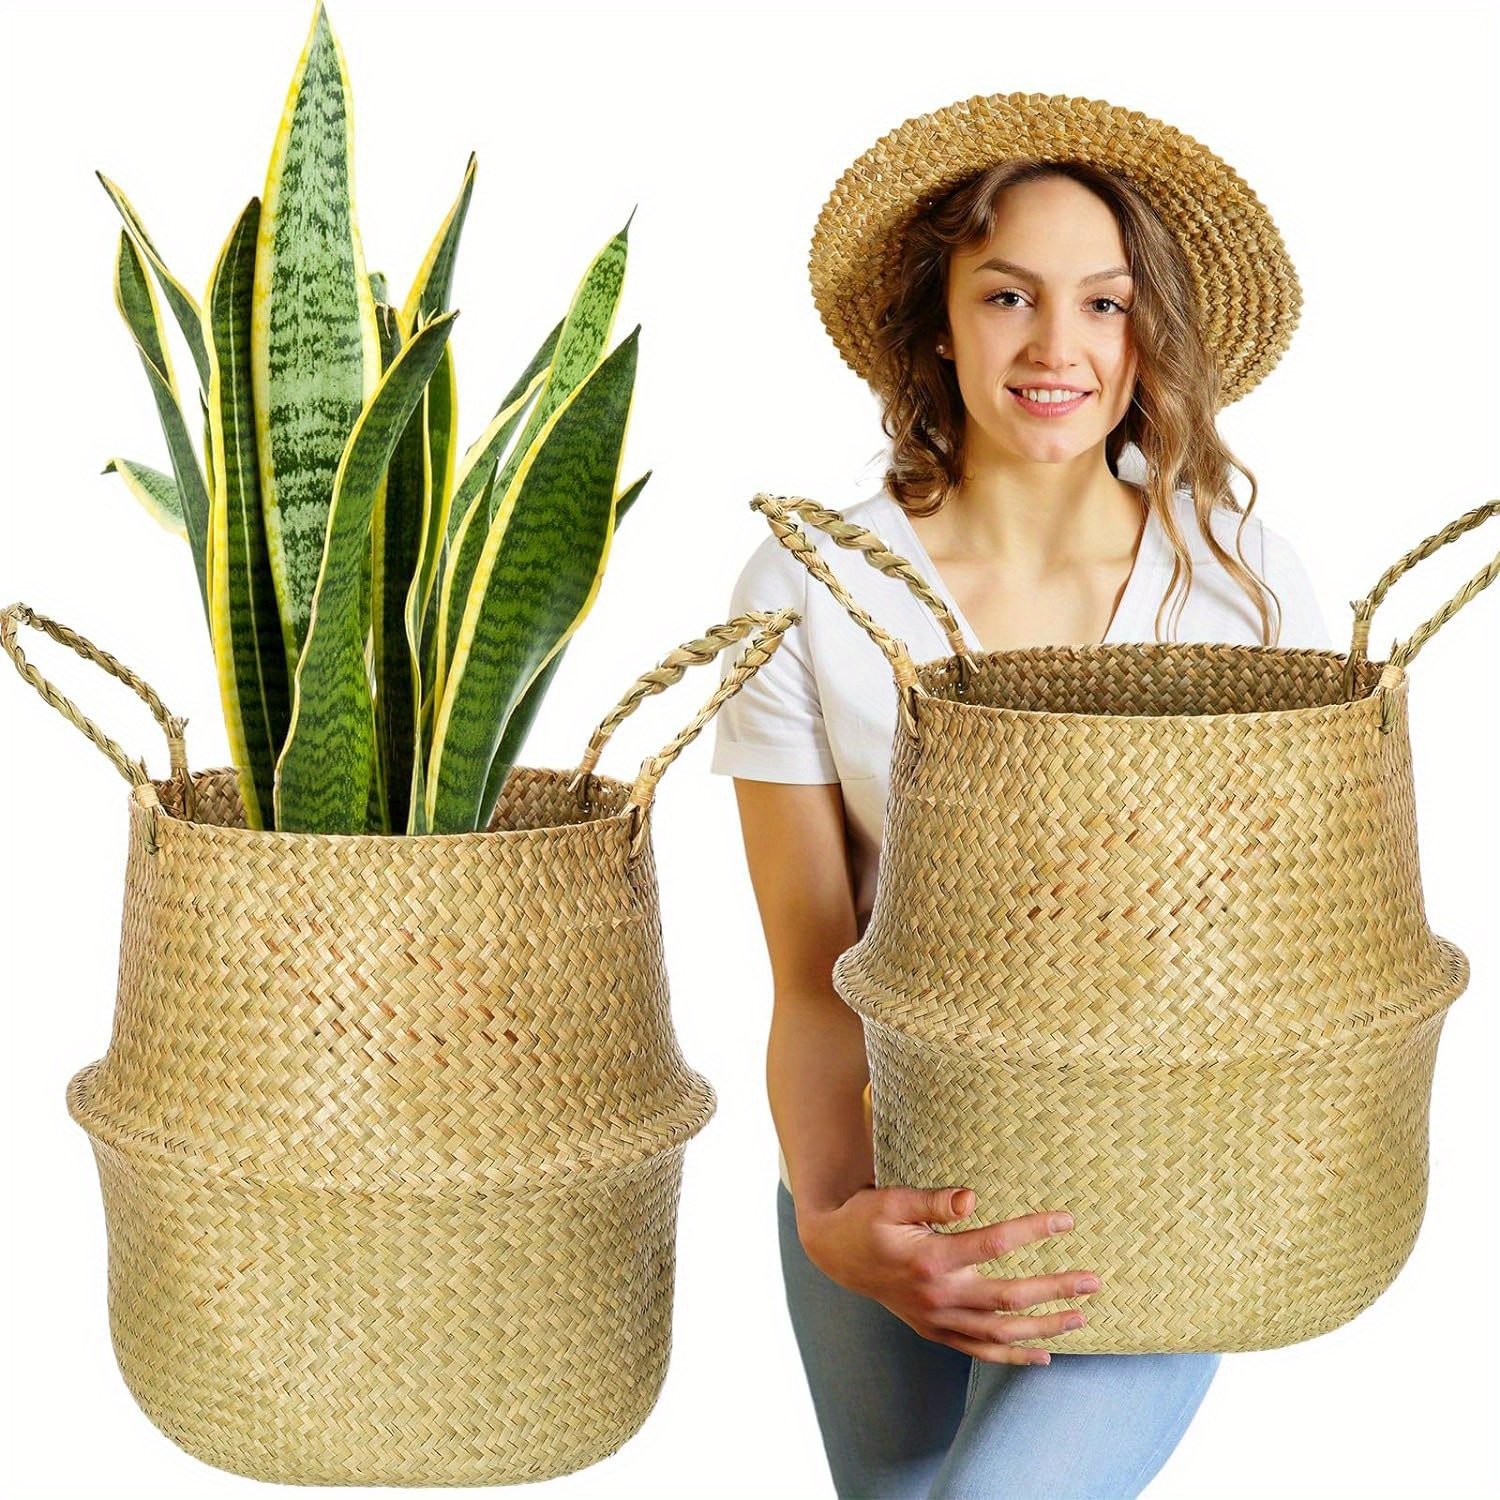 

1 Pack, 18 Inch Oversize Woven Seagrass Plant Basket Boho Belly Basket Decorative Weaved Basket With Handles For Storage Laundry Picnic Plant Pot Cover Beach Grocery Supplies